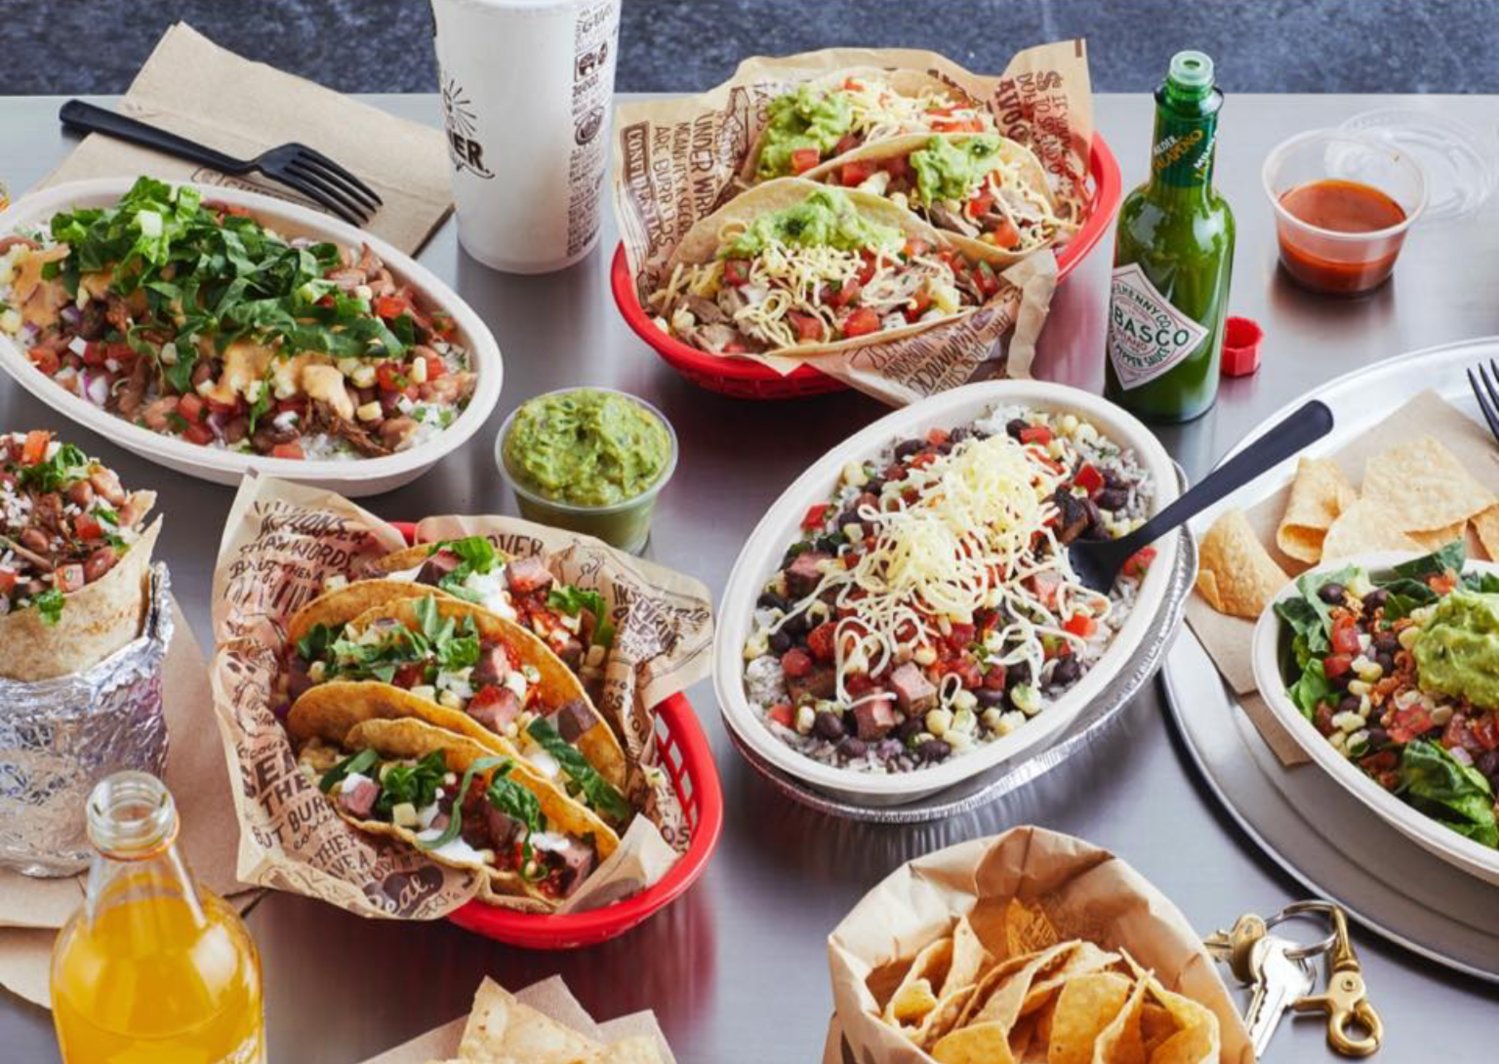 Chipotle is a fast-casual restaurant that is currently only located in Oxford, Starkville and Southaven.